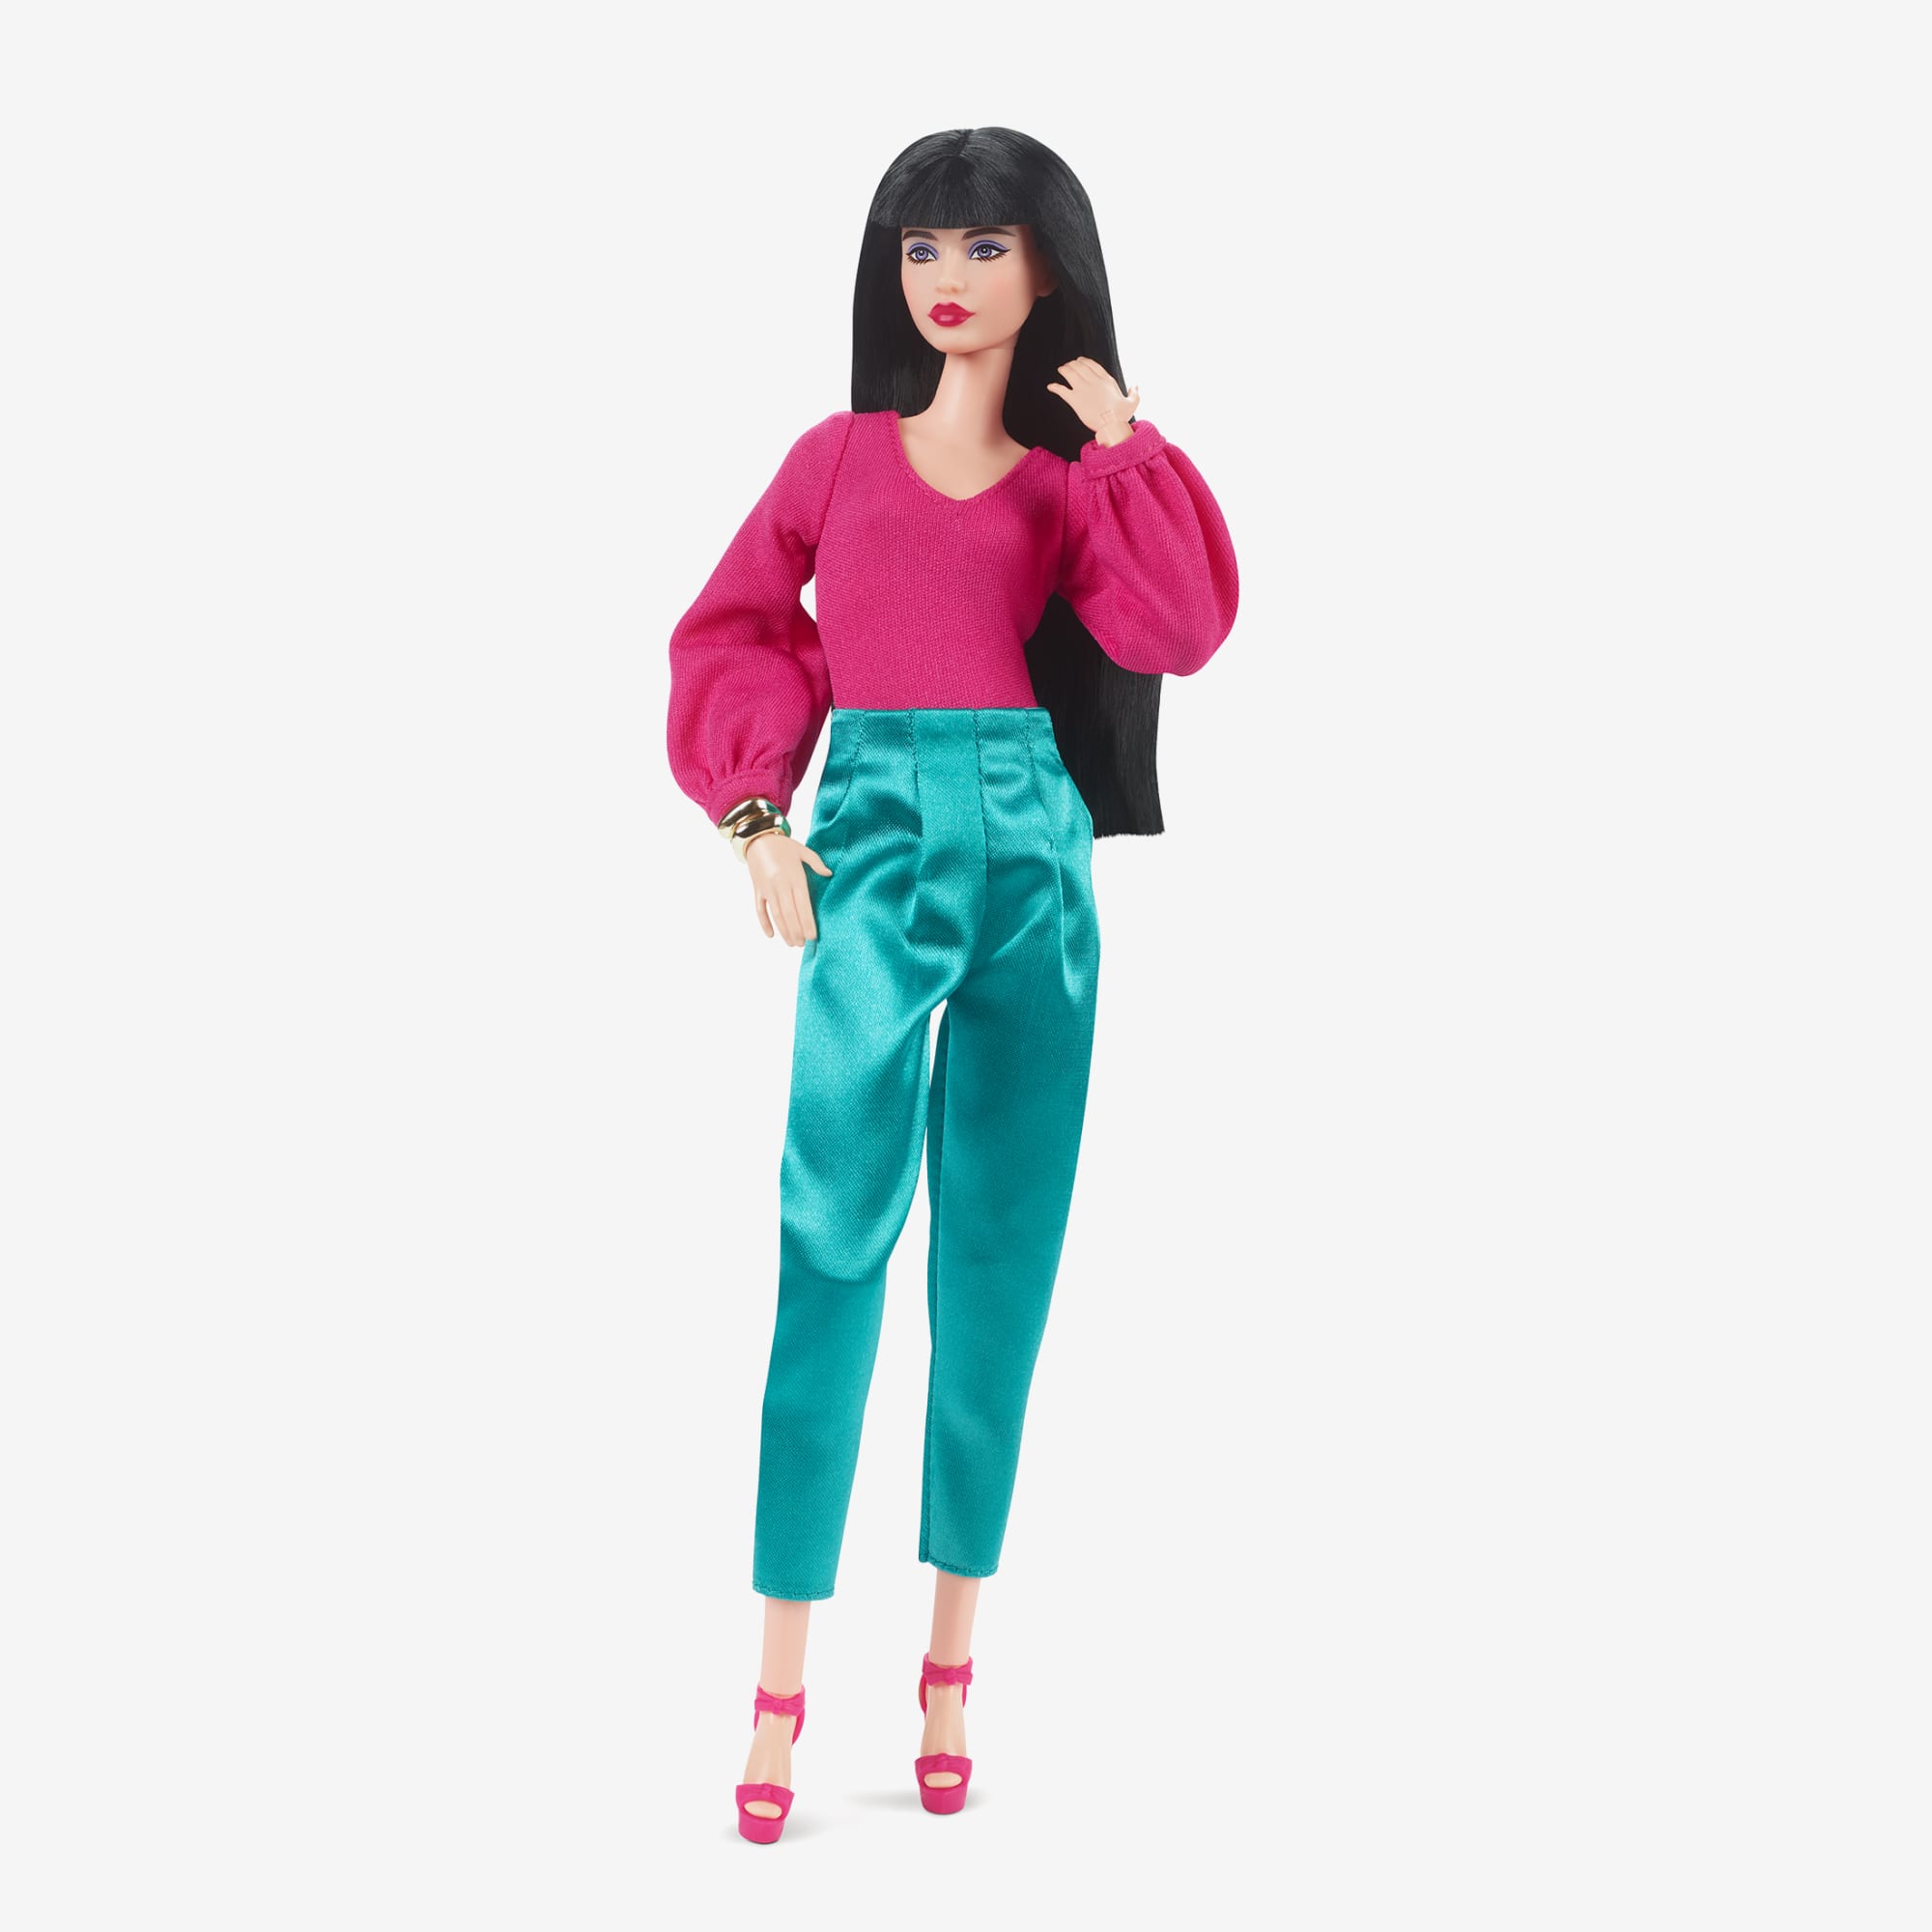 Barbie Looks Doll With MixandMatch Fashions Mattel Creations